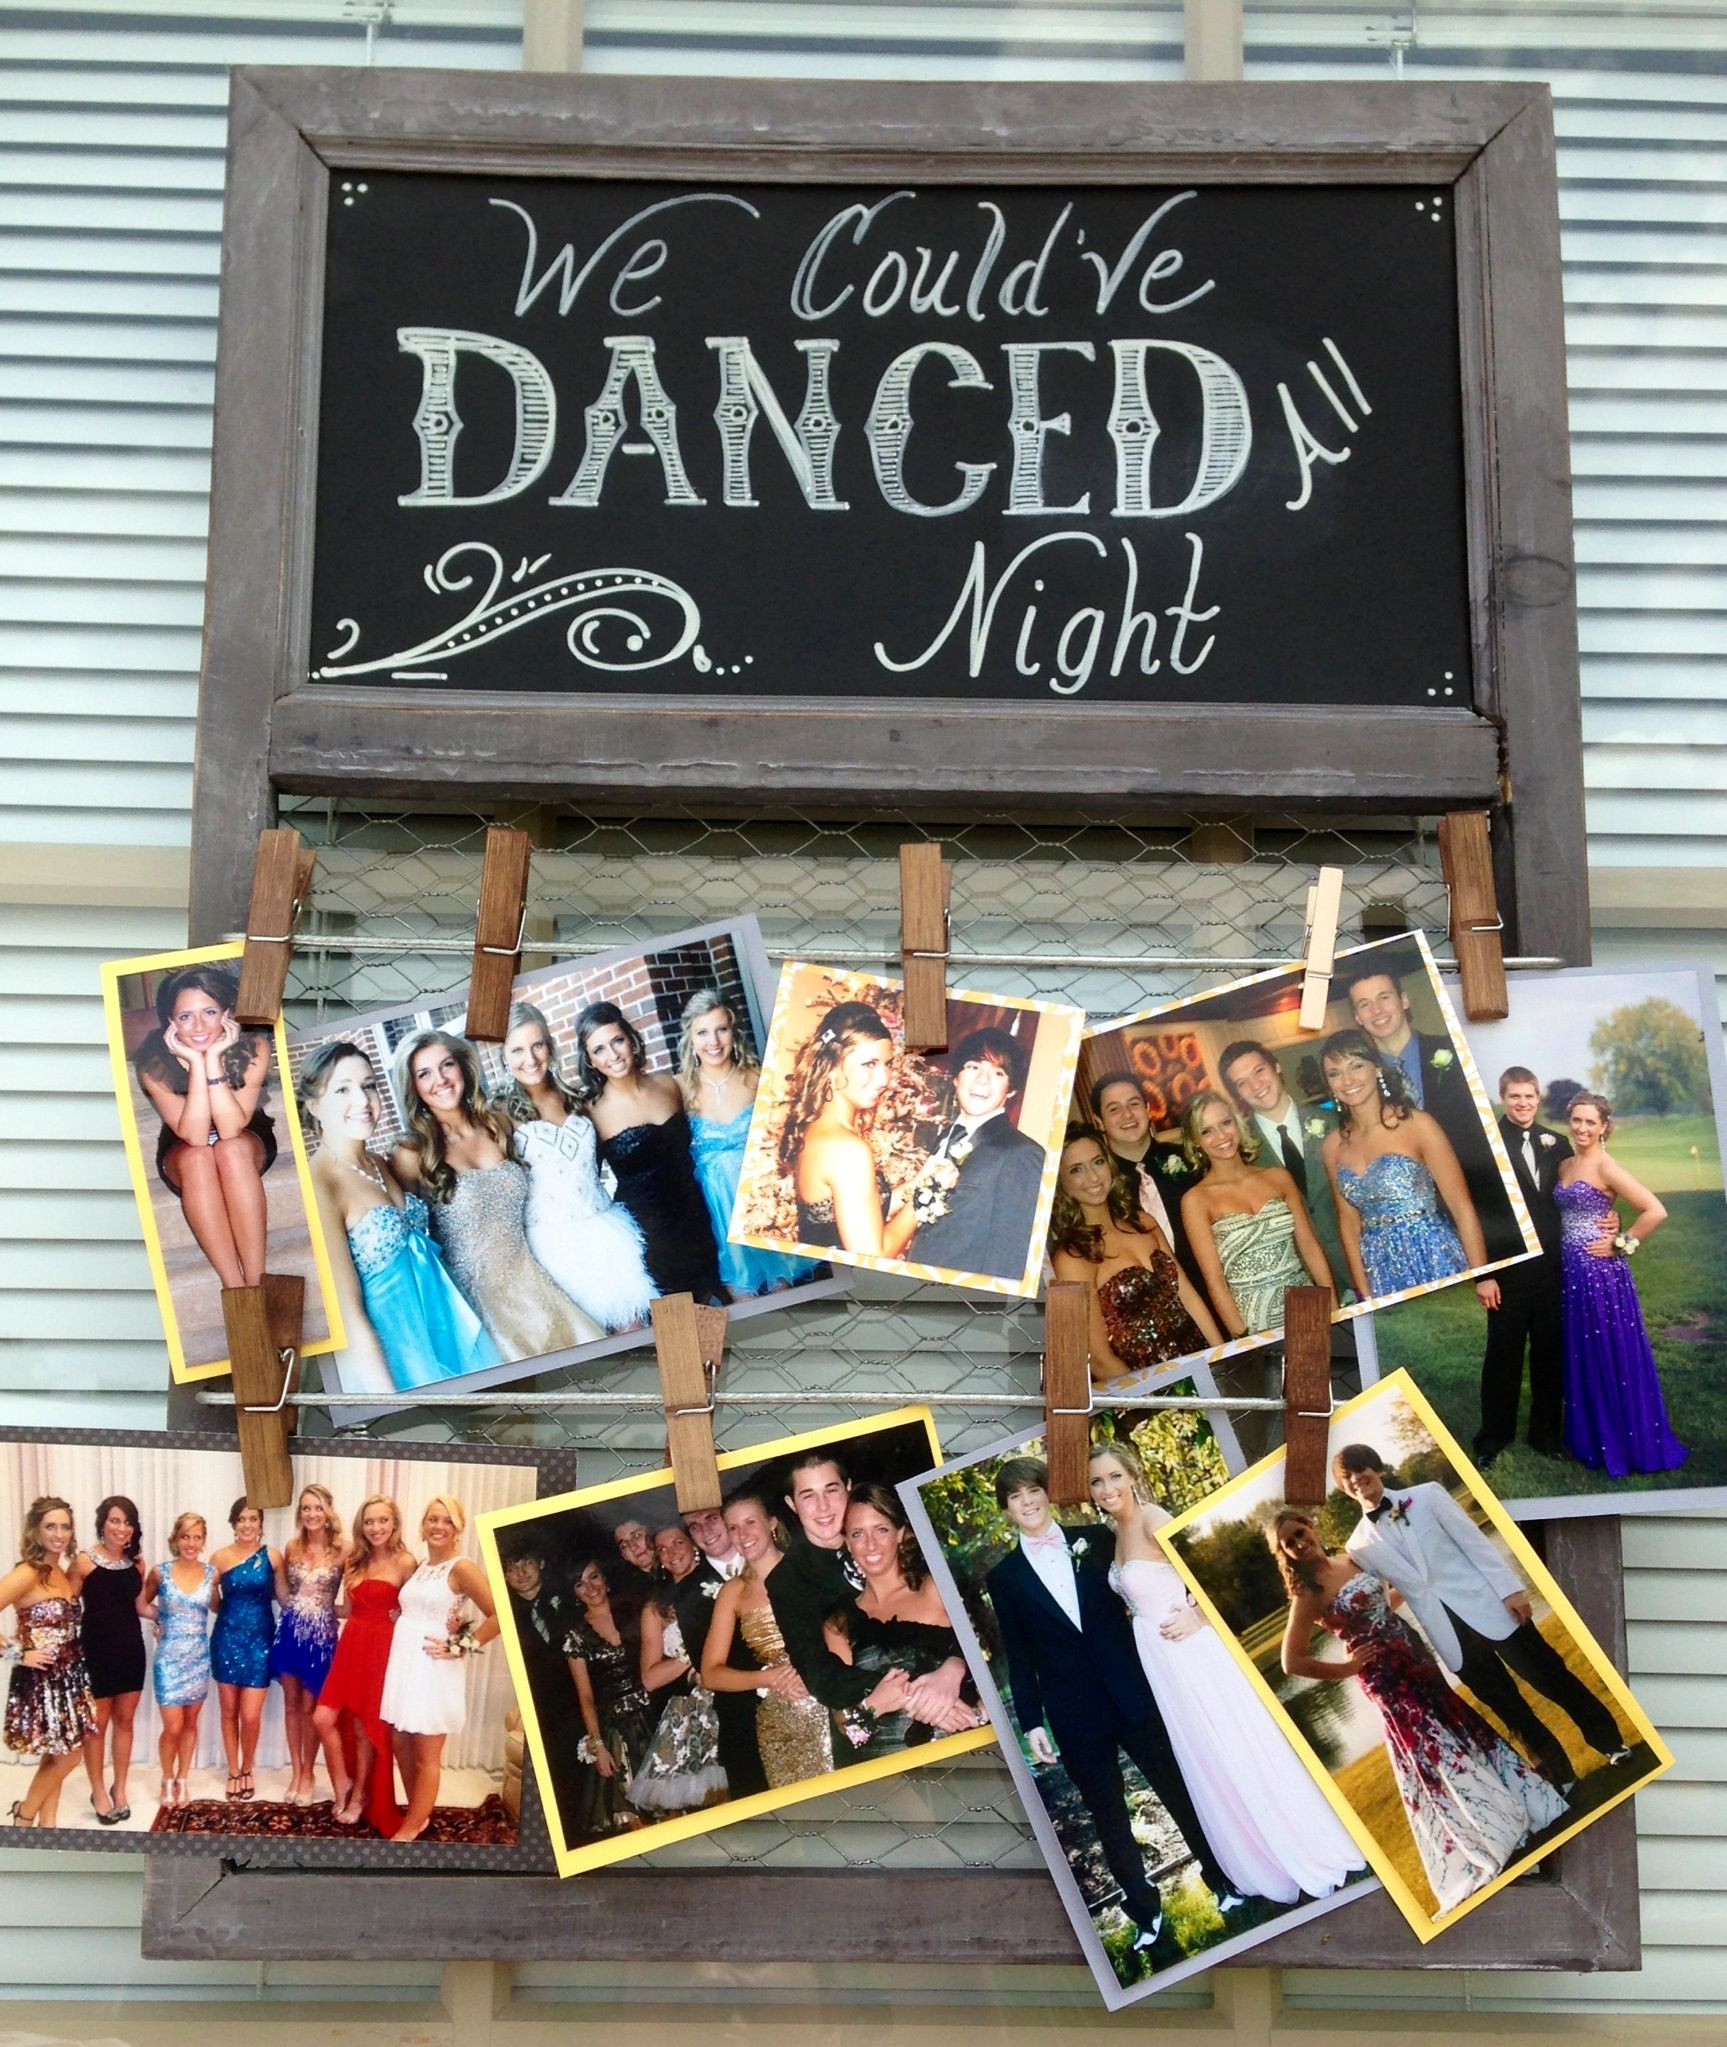 Winter Graduation Party Ideas
 A board of all of my winter formals and proms over the